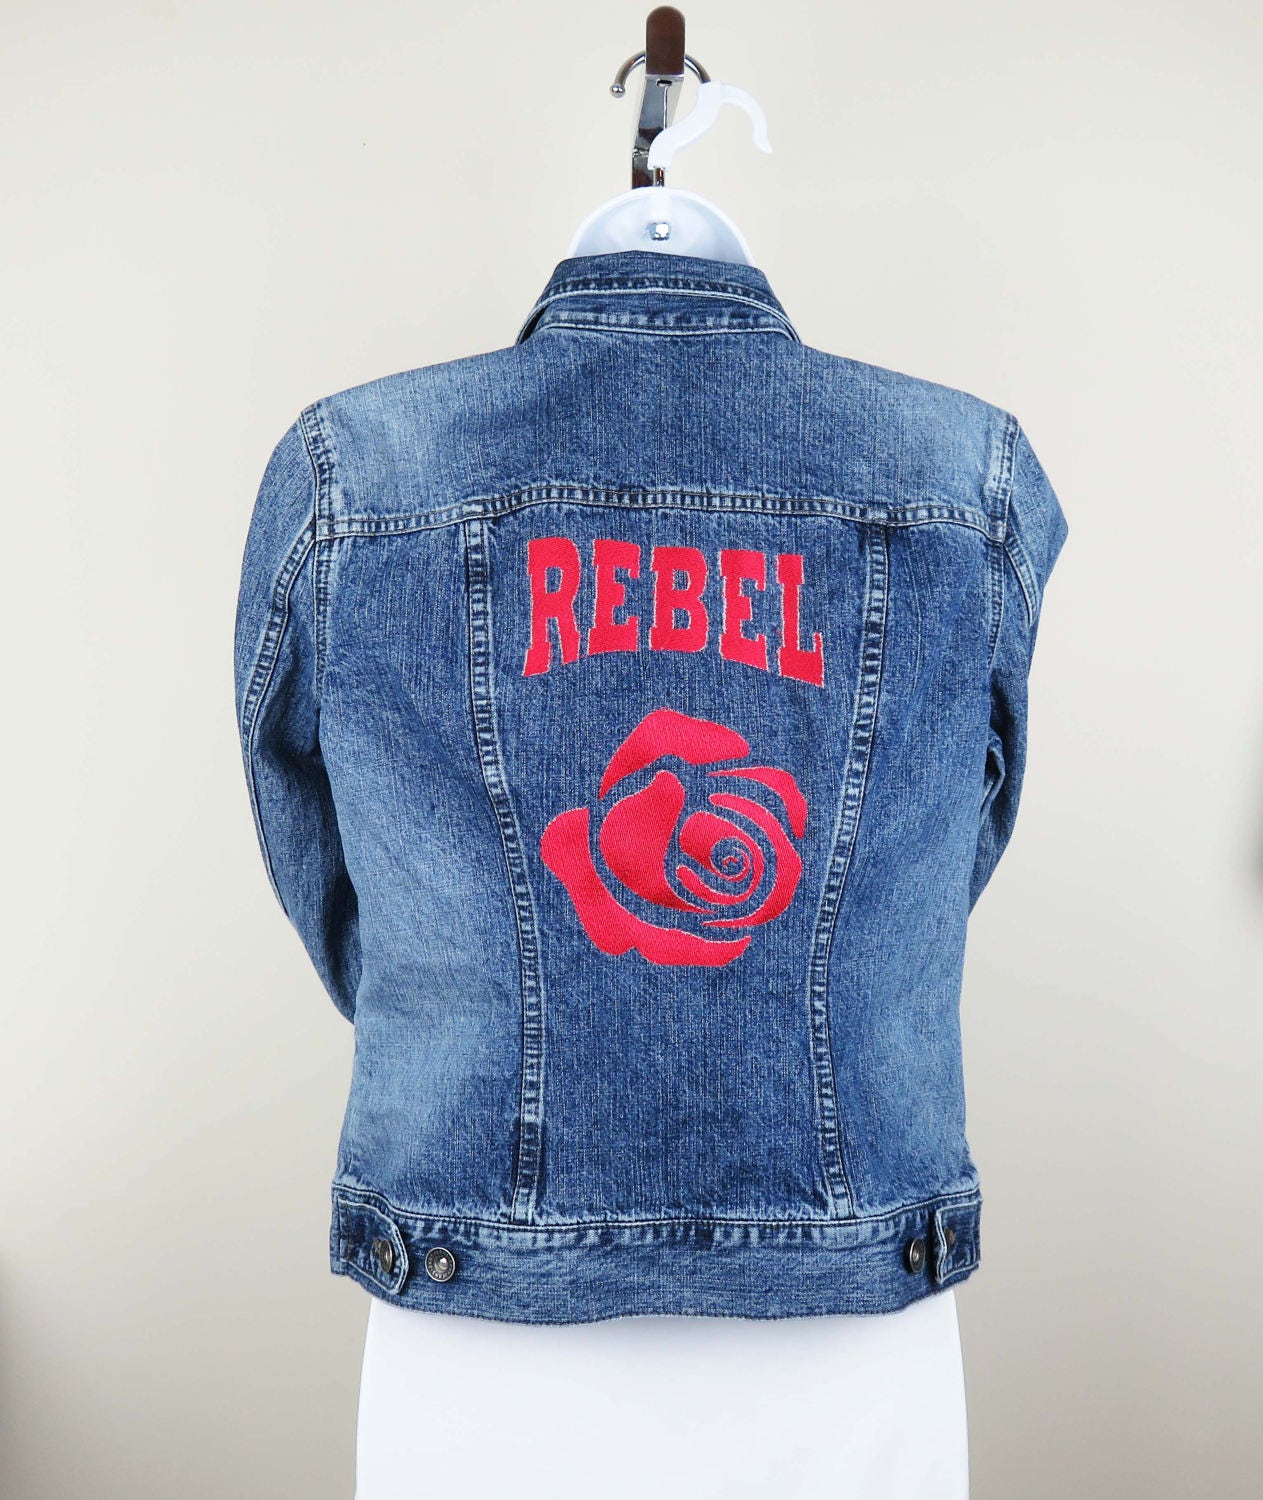 Rebel Upcycled Denim Jacket With Embroidered Red Rose, Restyled